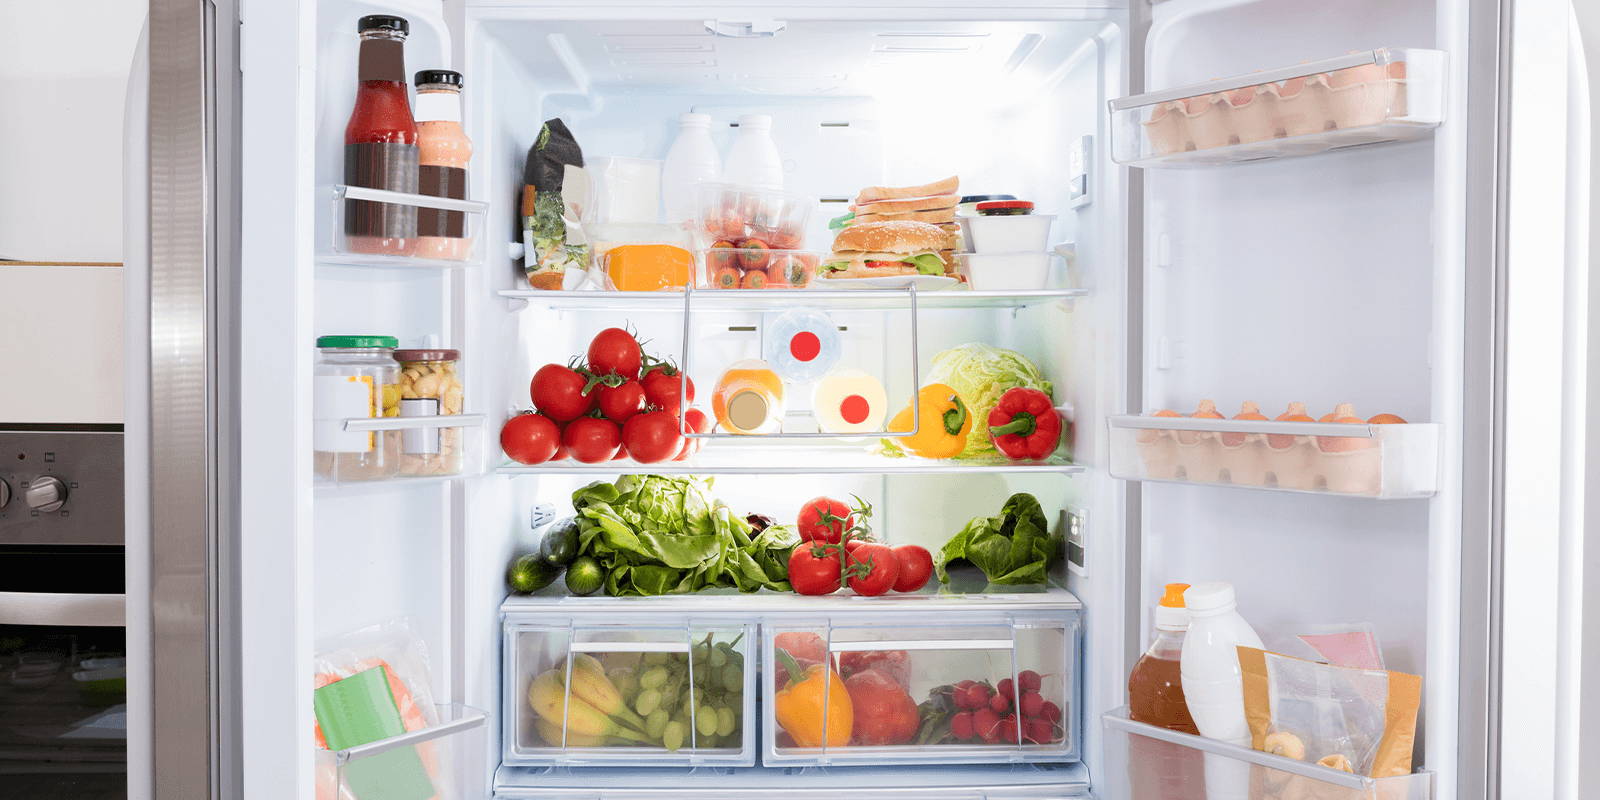 Fridge with open doors displaying fruits and vegetables.